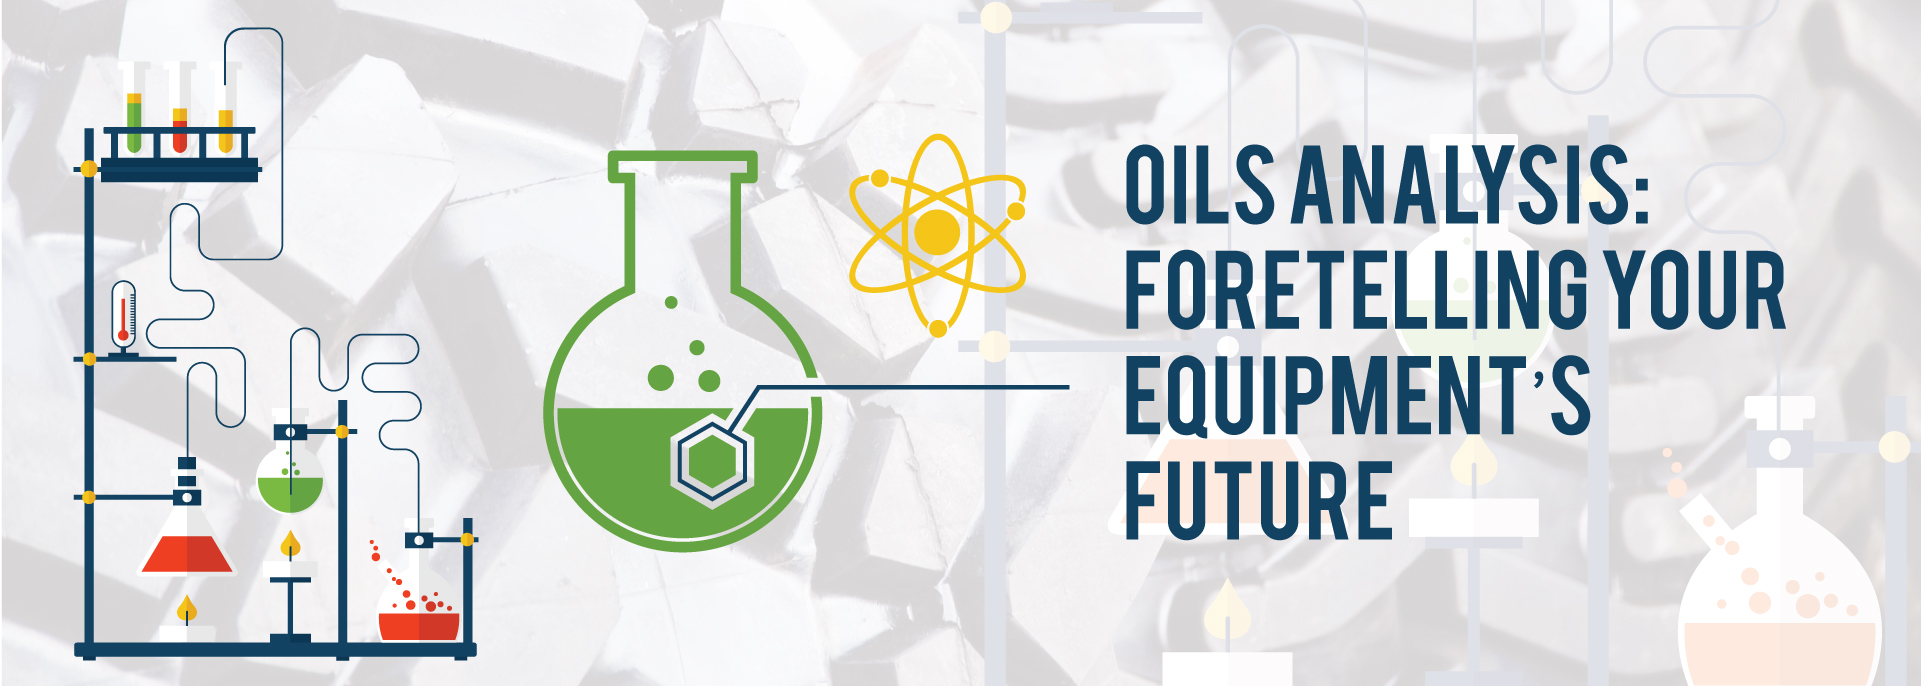 Oils Analysis: Foretelling Your Equipment’s Future | ADI Agency | Protect My Iron